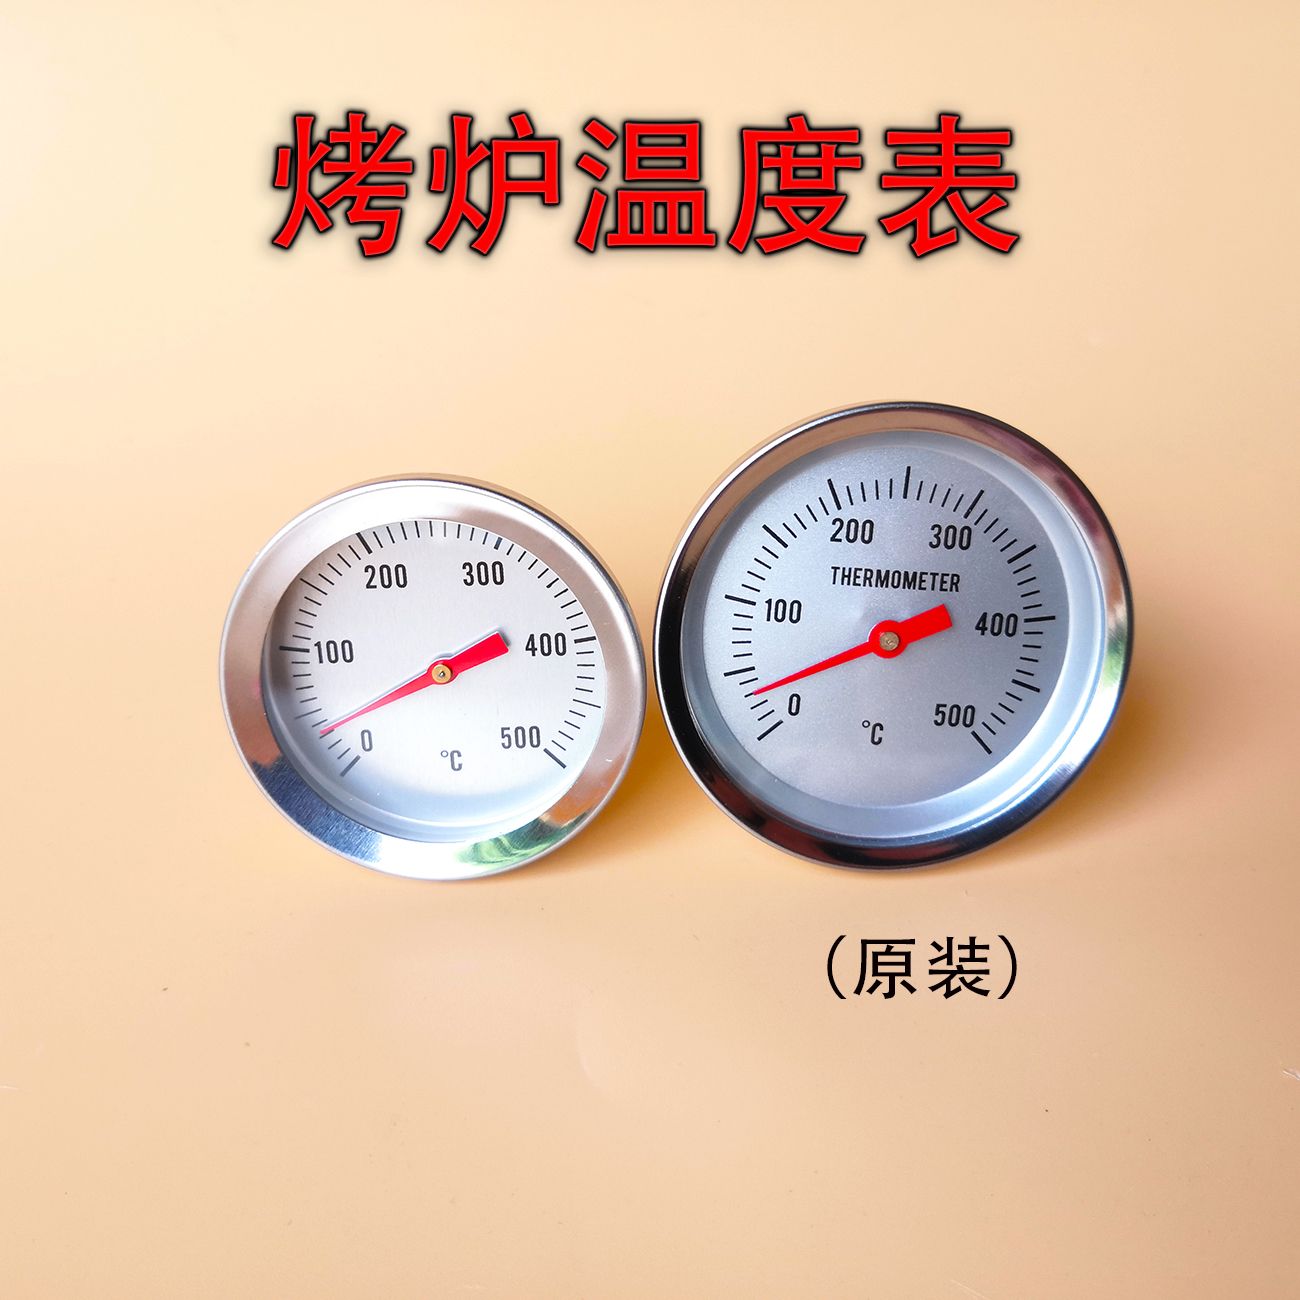 Roast duck oven thermometer roast goose thermometer commercial hanging oven thermometer oven accessories 350 ℃ 500 ℃ parcel post